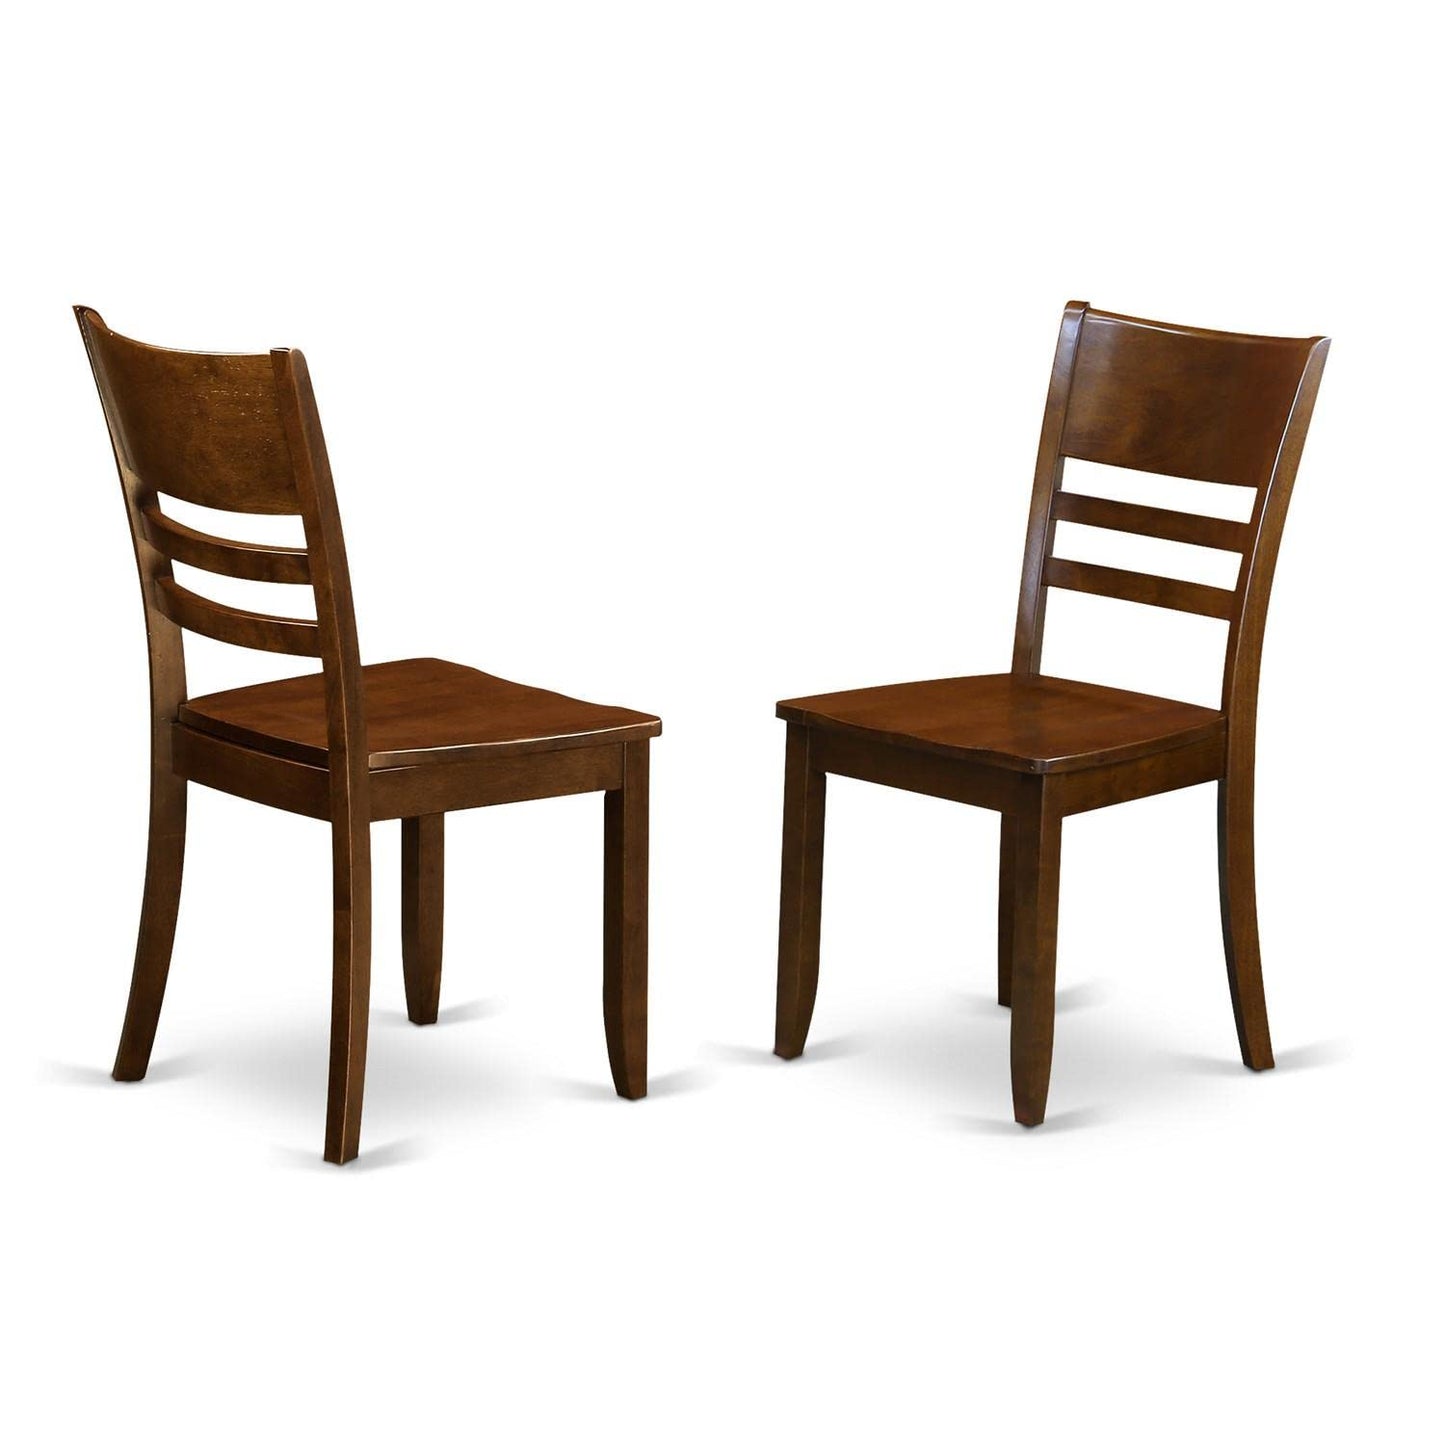 East West Furniture Lynfield Dining Ladder Back Wood Seat Kitchen Chairs, Set of 2, Espresso